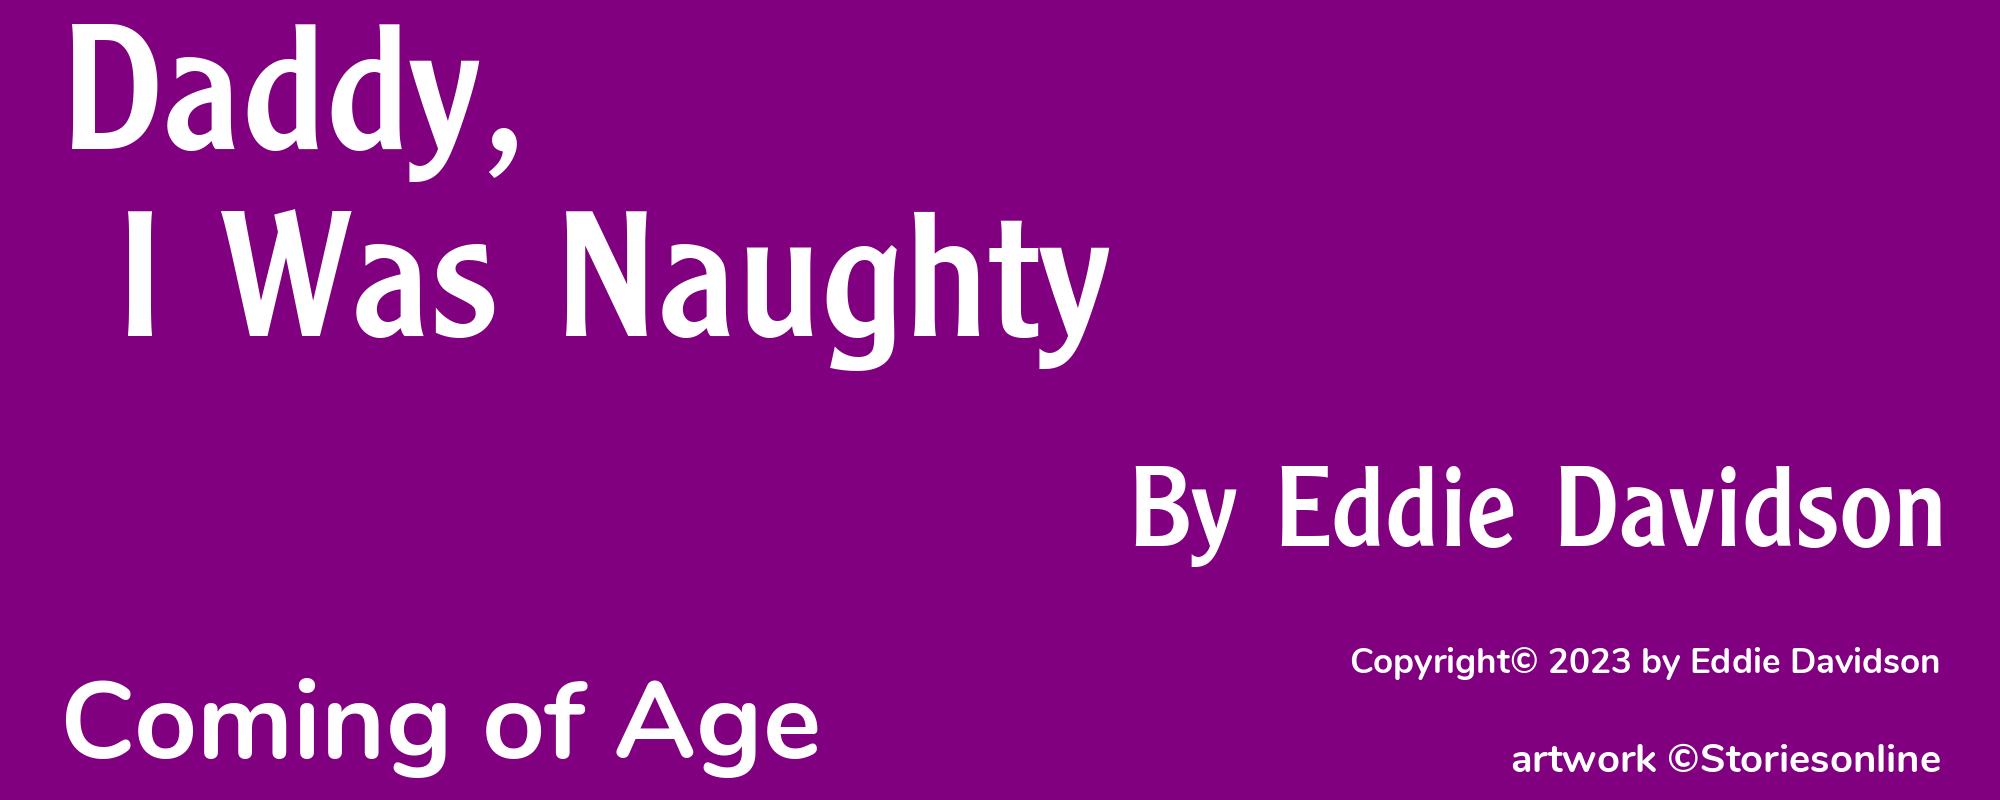 Daddy, I Was Naughty - Cover